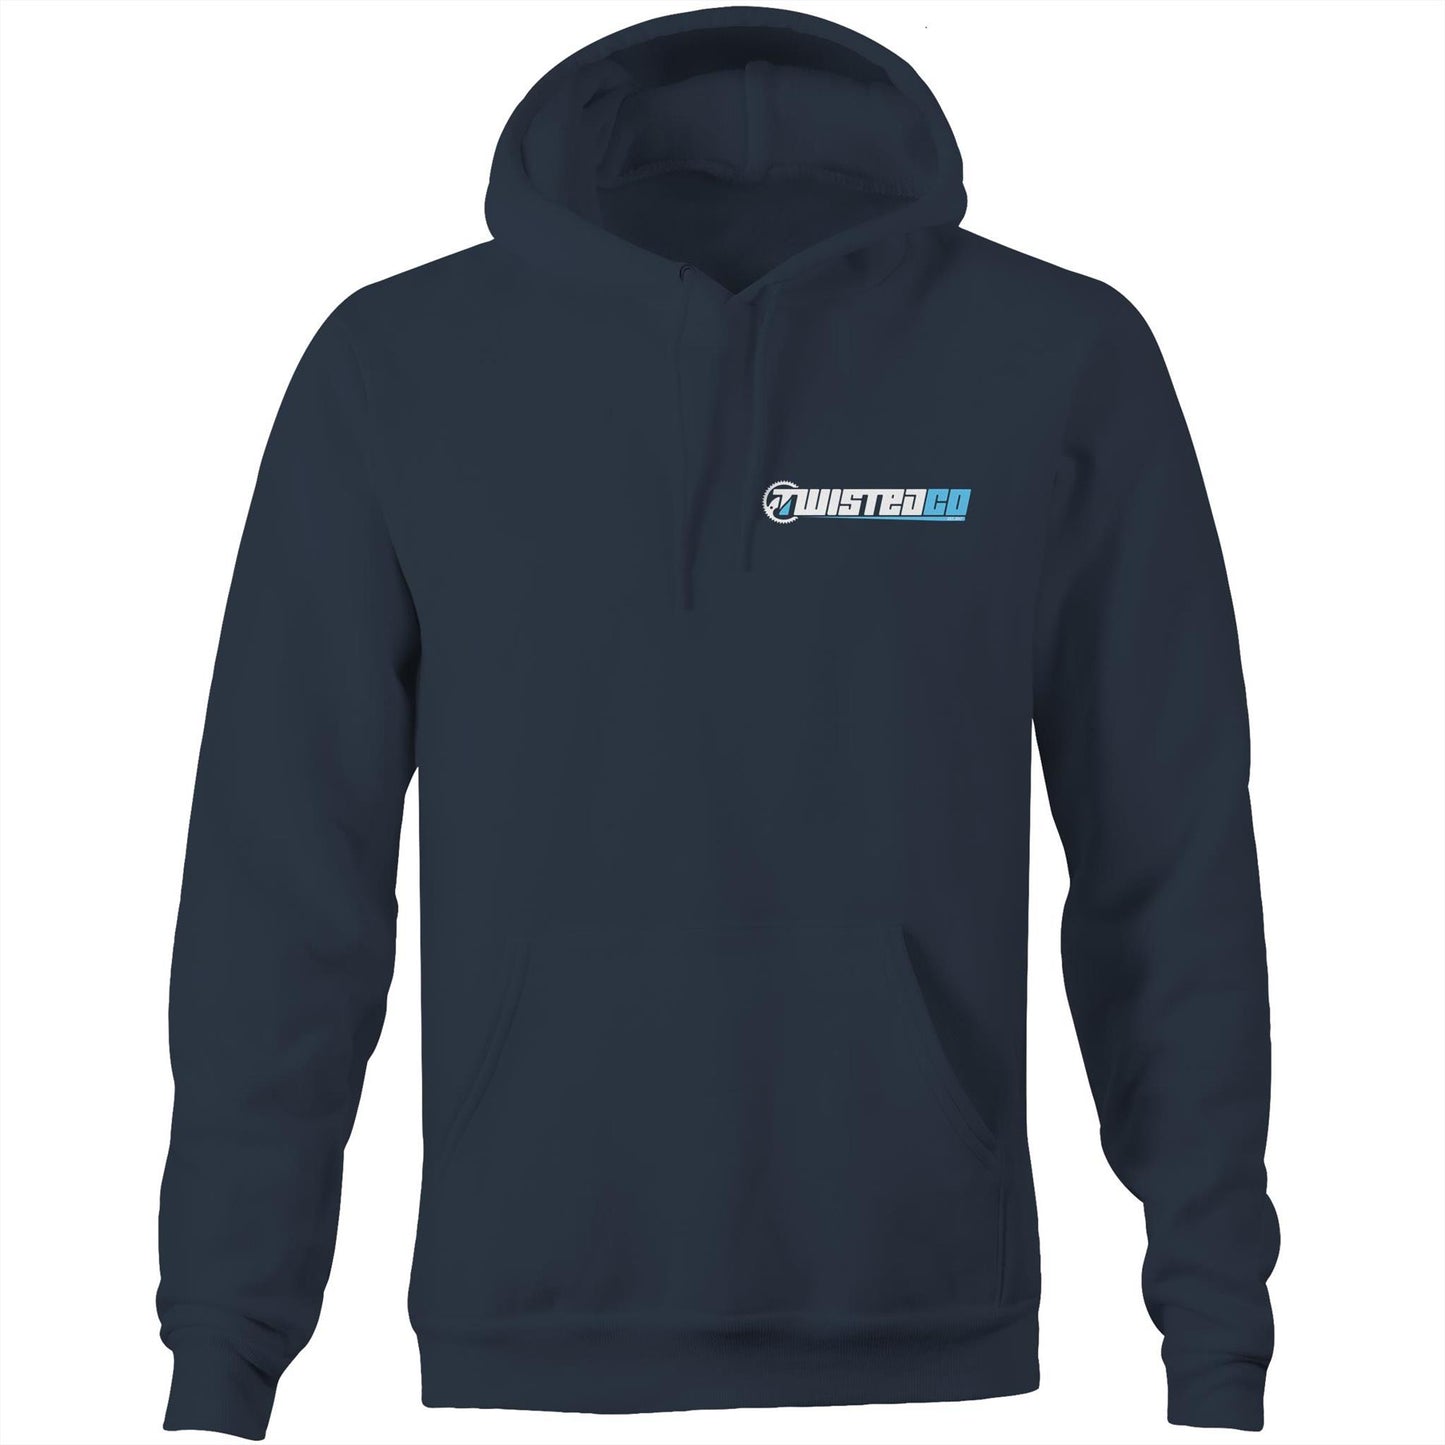 Twisted Co AS Colour Hoodie - Light Blue logo Black/Navy/Grey